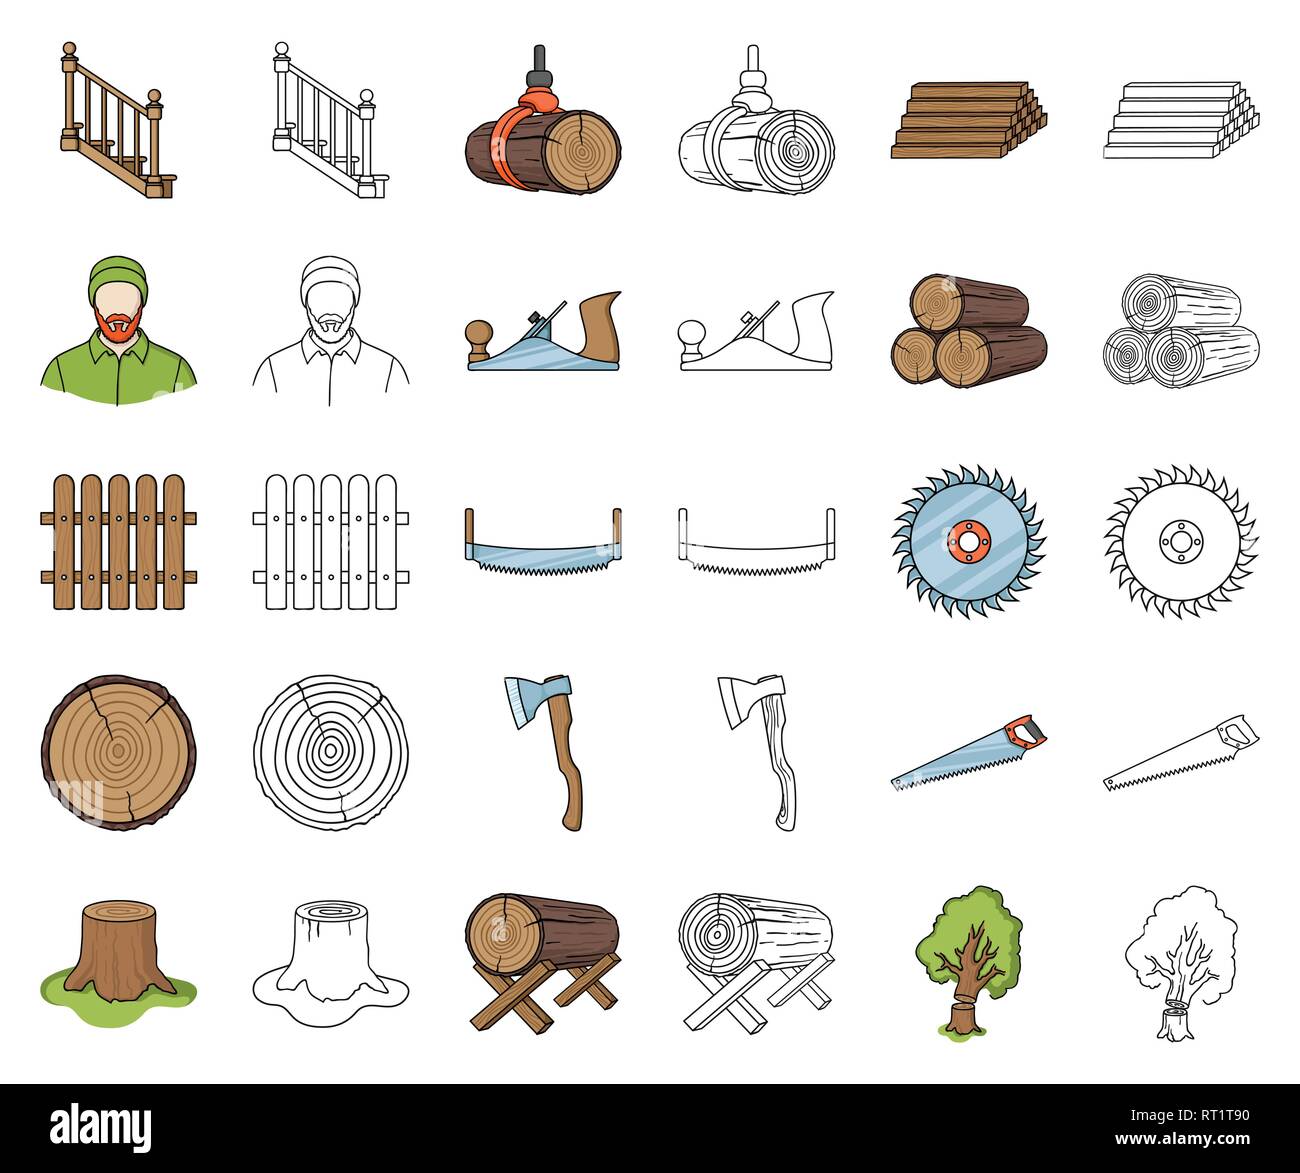 art,axe,cartoon,outline,chisel,collection,crane,cross,design,disc,equipment,falling,fence,goats,hand,hydraulic,icon,illustration,isolated,jack,logo,logs,lumber,lumbers,lumbrejack,plane,processing,product,production,saw,sawing,sawmill,section,set,sign,stack,stairs,stump,symbol,timber,tools,tree,two-man,vector,web Vector Vectors , Stock Vector